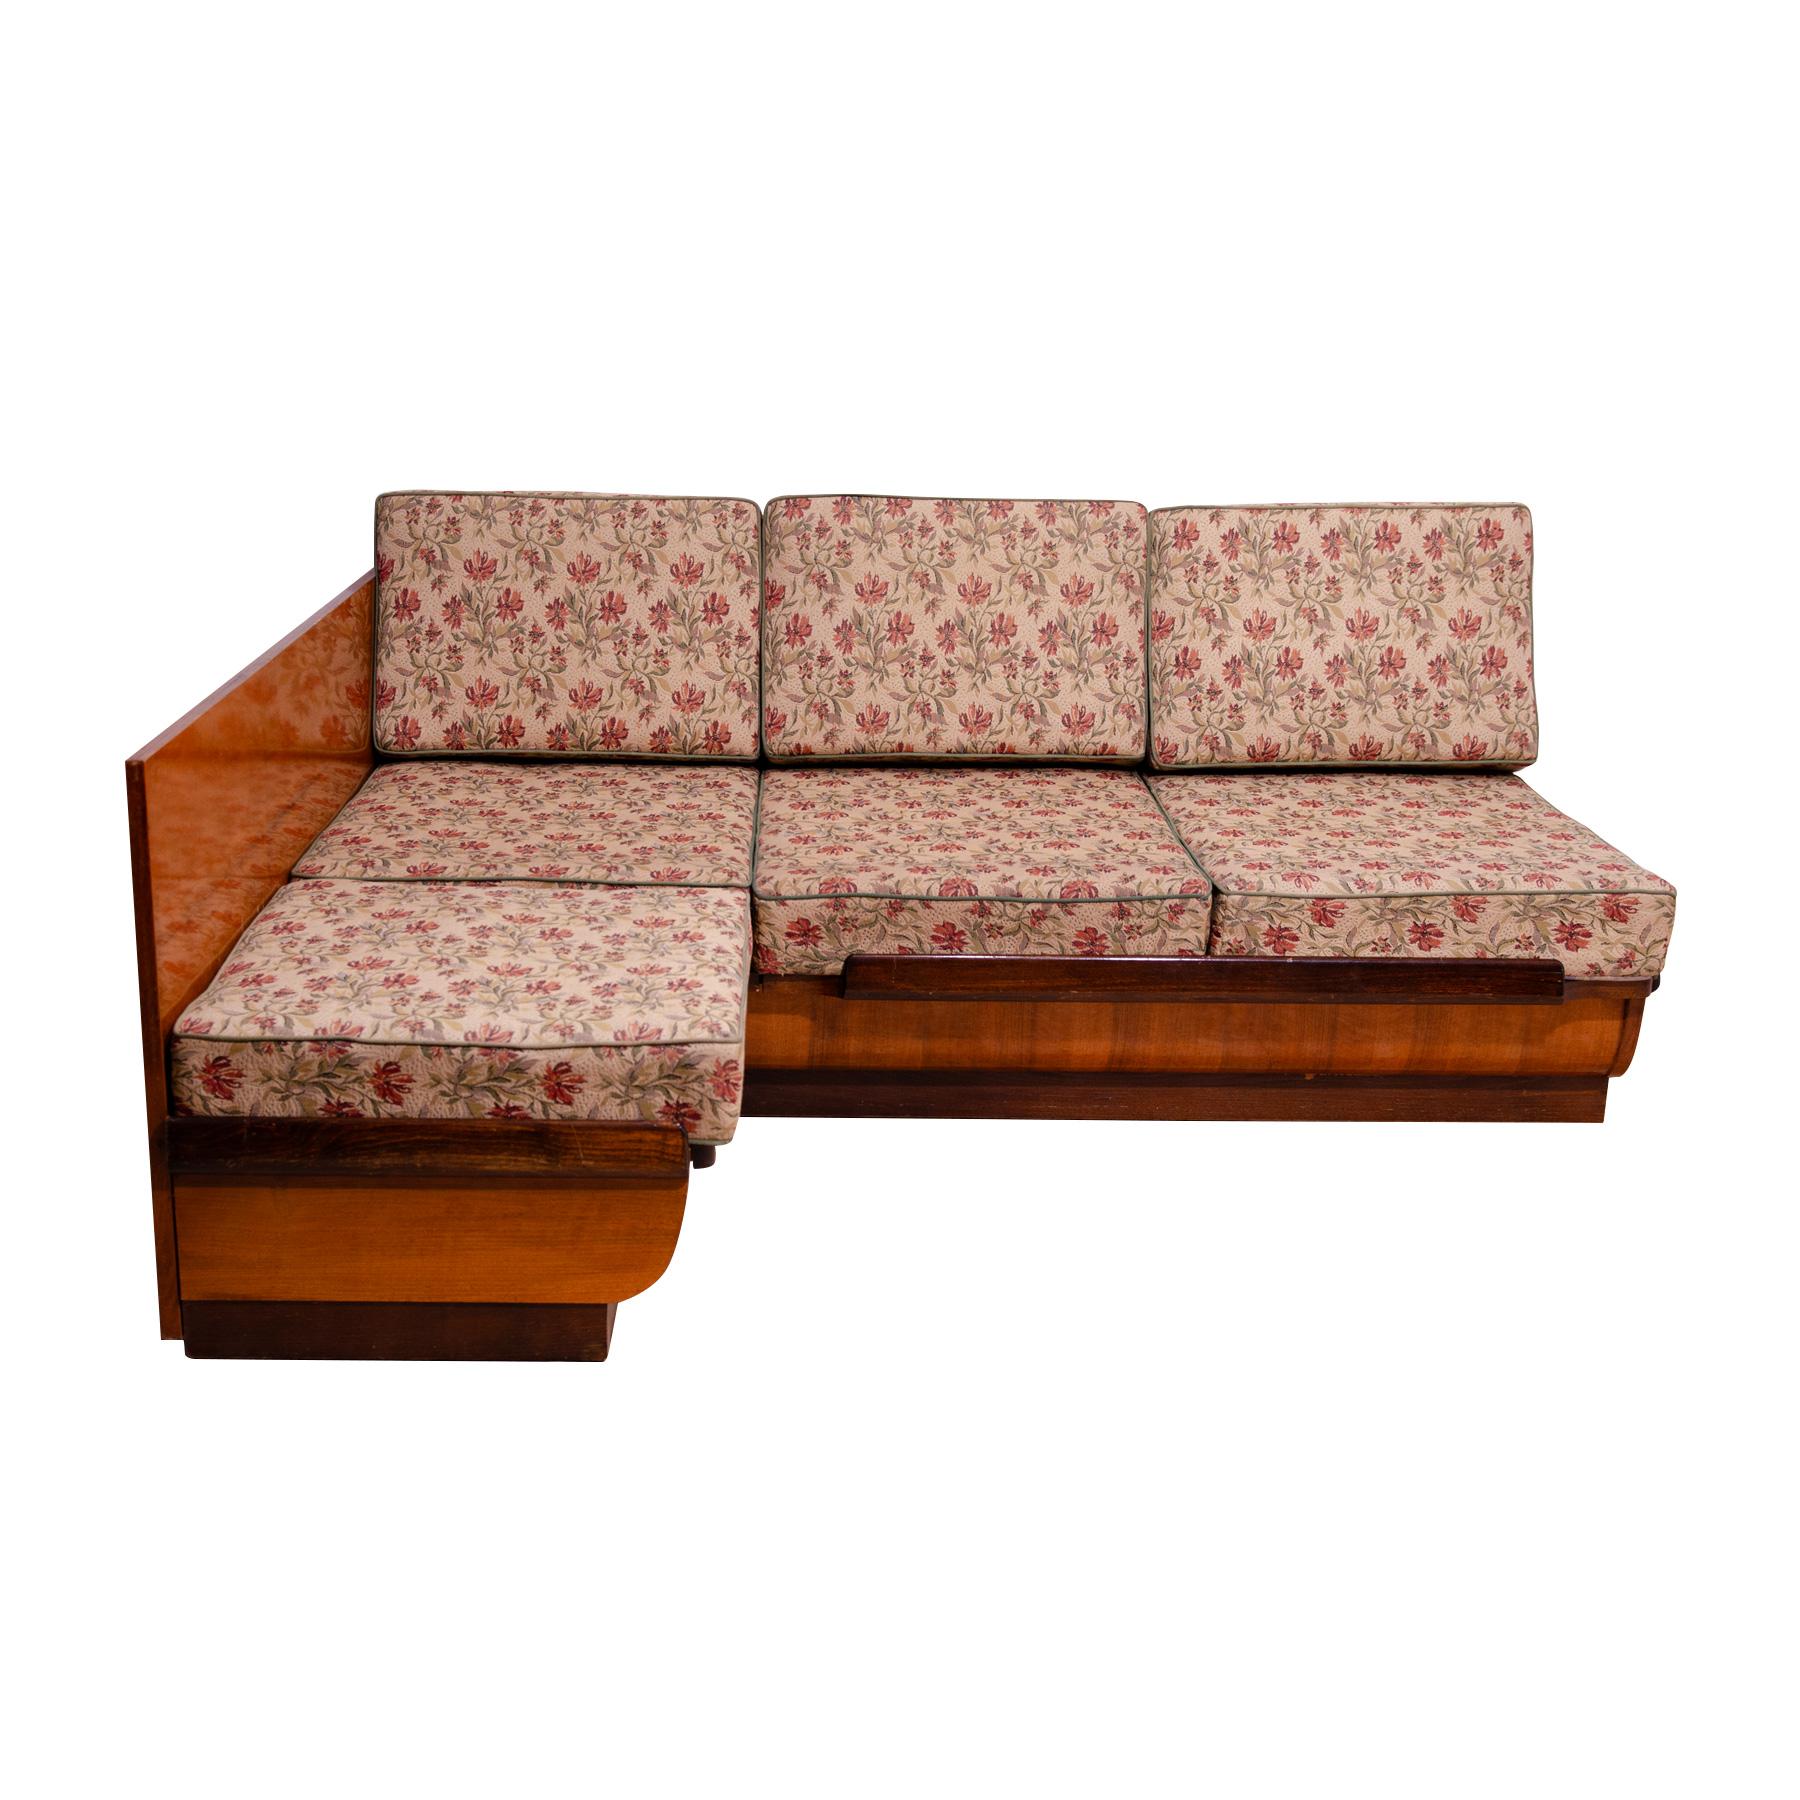 This mid century corner sofa bed designed by Jindřich Halabala. It was made in the former Czechoslovakia in the 1950´s. This sofa features a wooden structure that is veneered in walnut. Sofa is adjustable for sleeping and is in very good